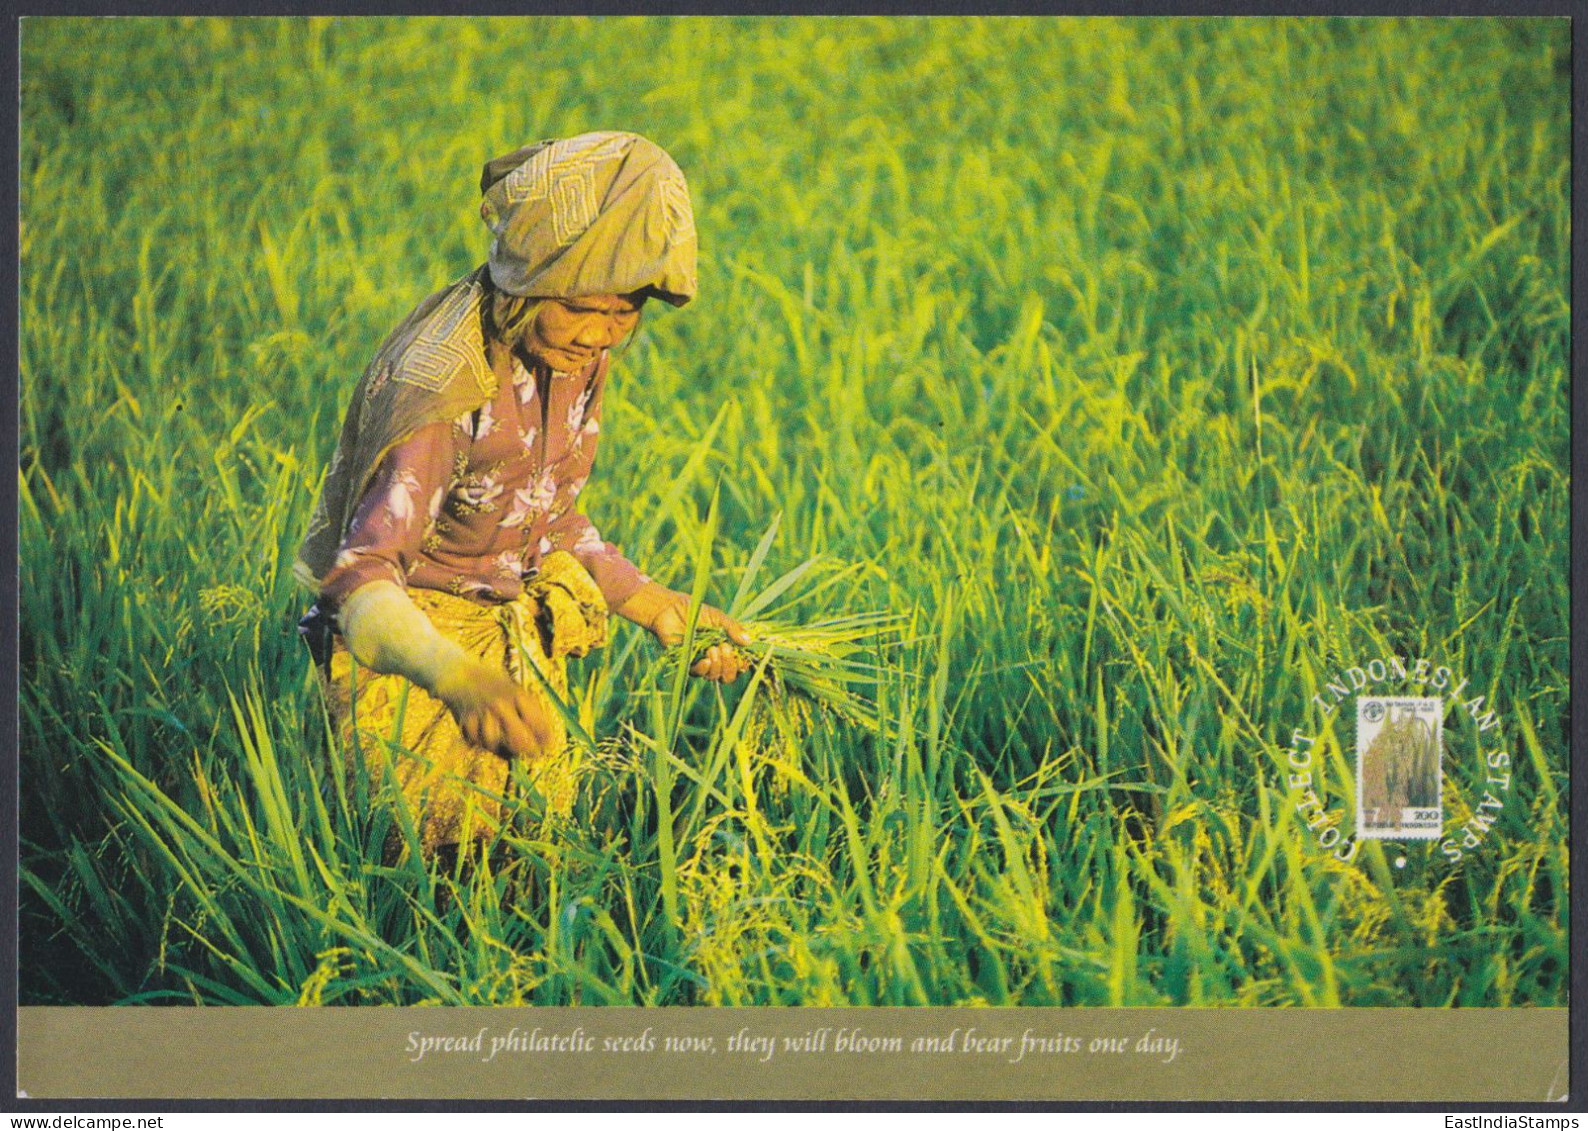 Indonesia 2000 Mint Postcard Paddy Picking Sumedang, West Java, Rice, Farming, Farm, Agriculture, Farmer, Woman - Indonesien